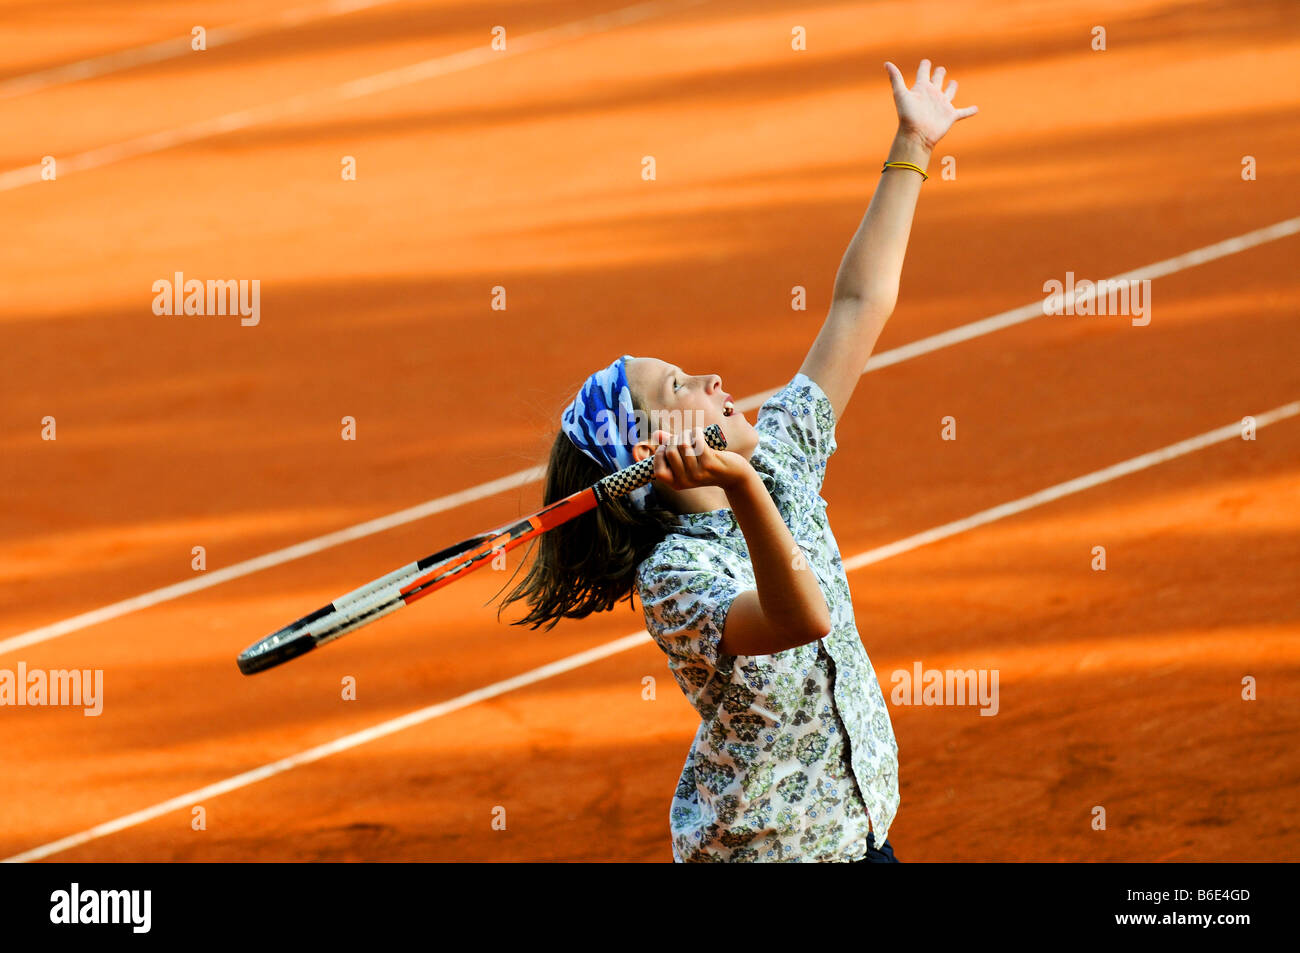 close up action shot of girl playing tennis Stock Photo